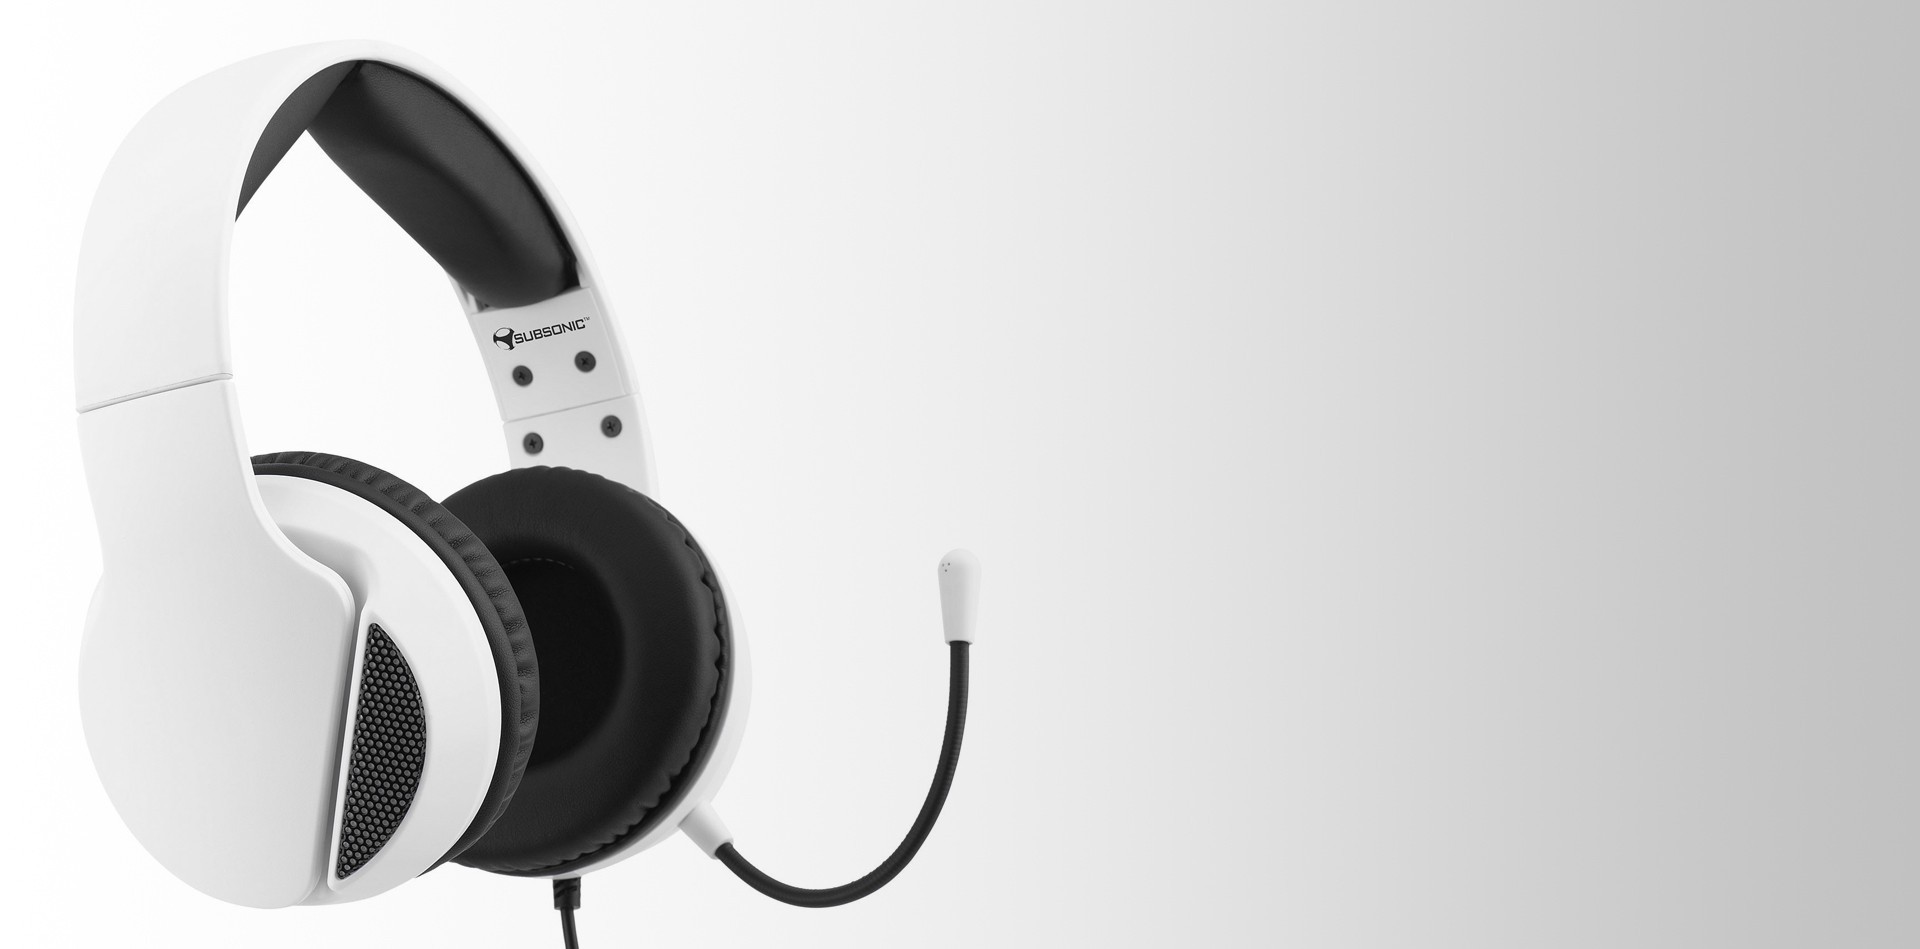 Cascos gaming | Subsonic